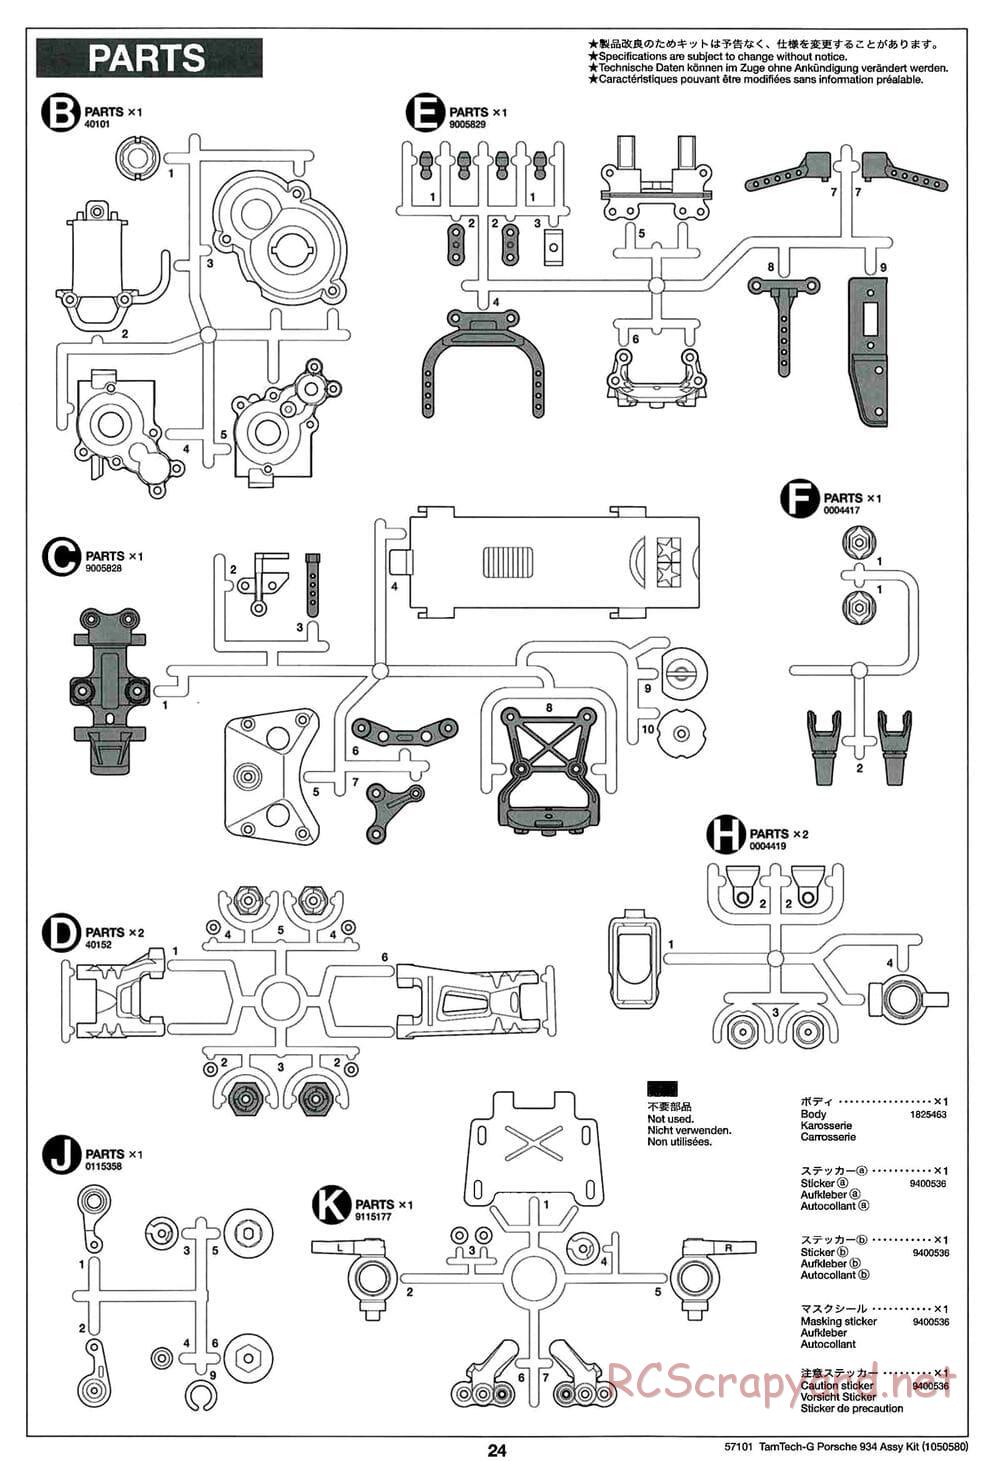 Tamiya - Porsche Turbo RSR - GT-01 Chassis - Manual - Page 24